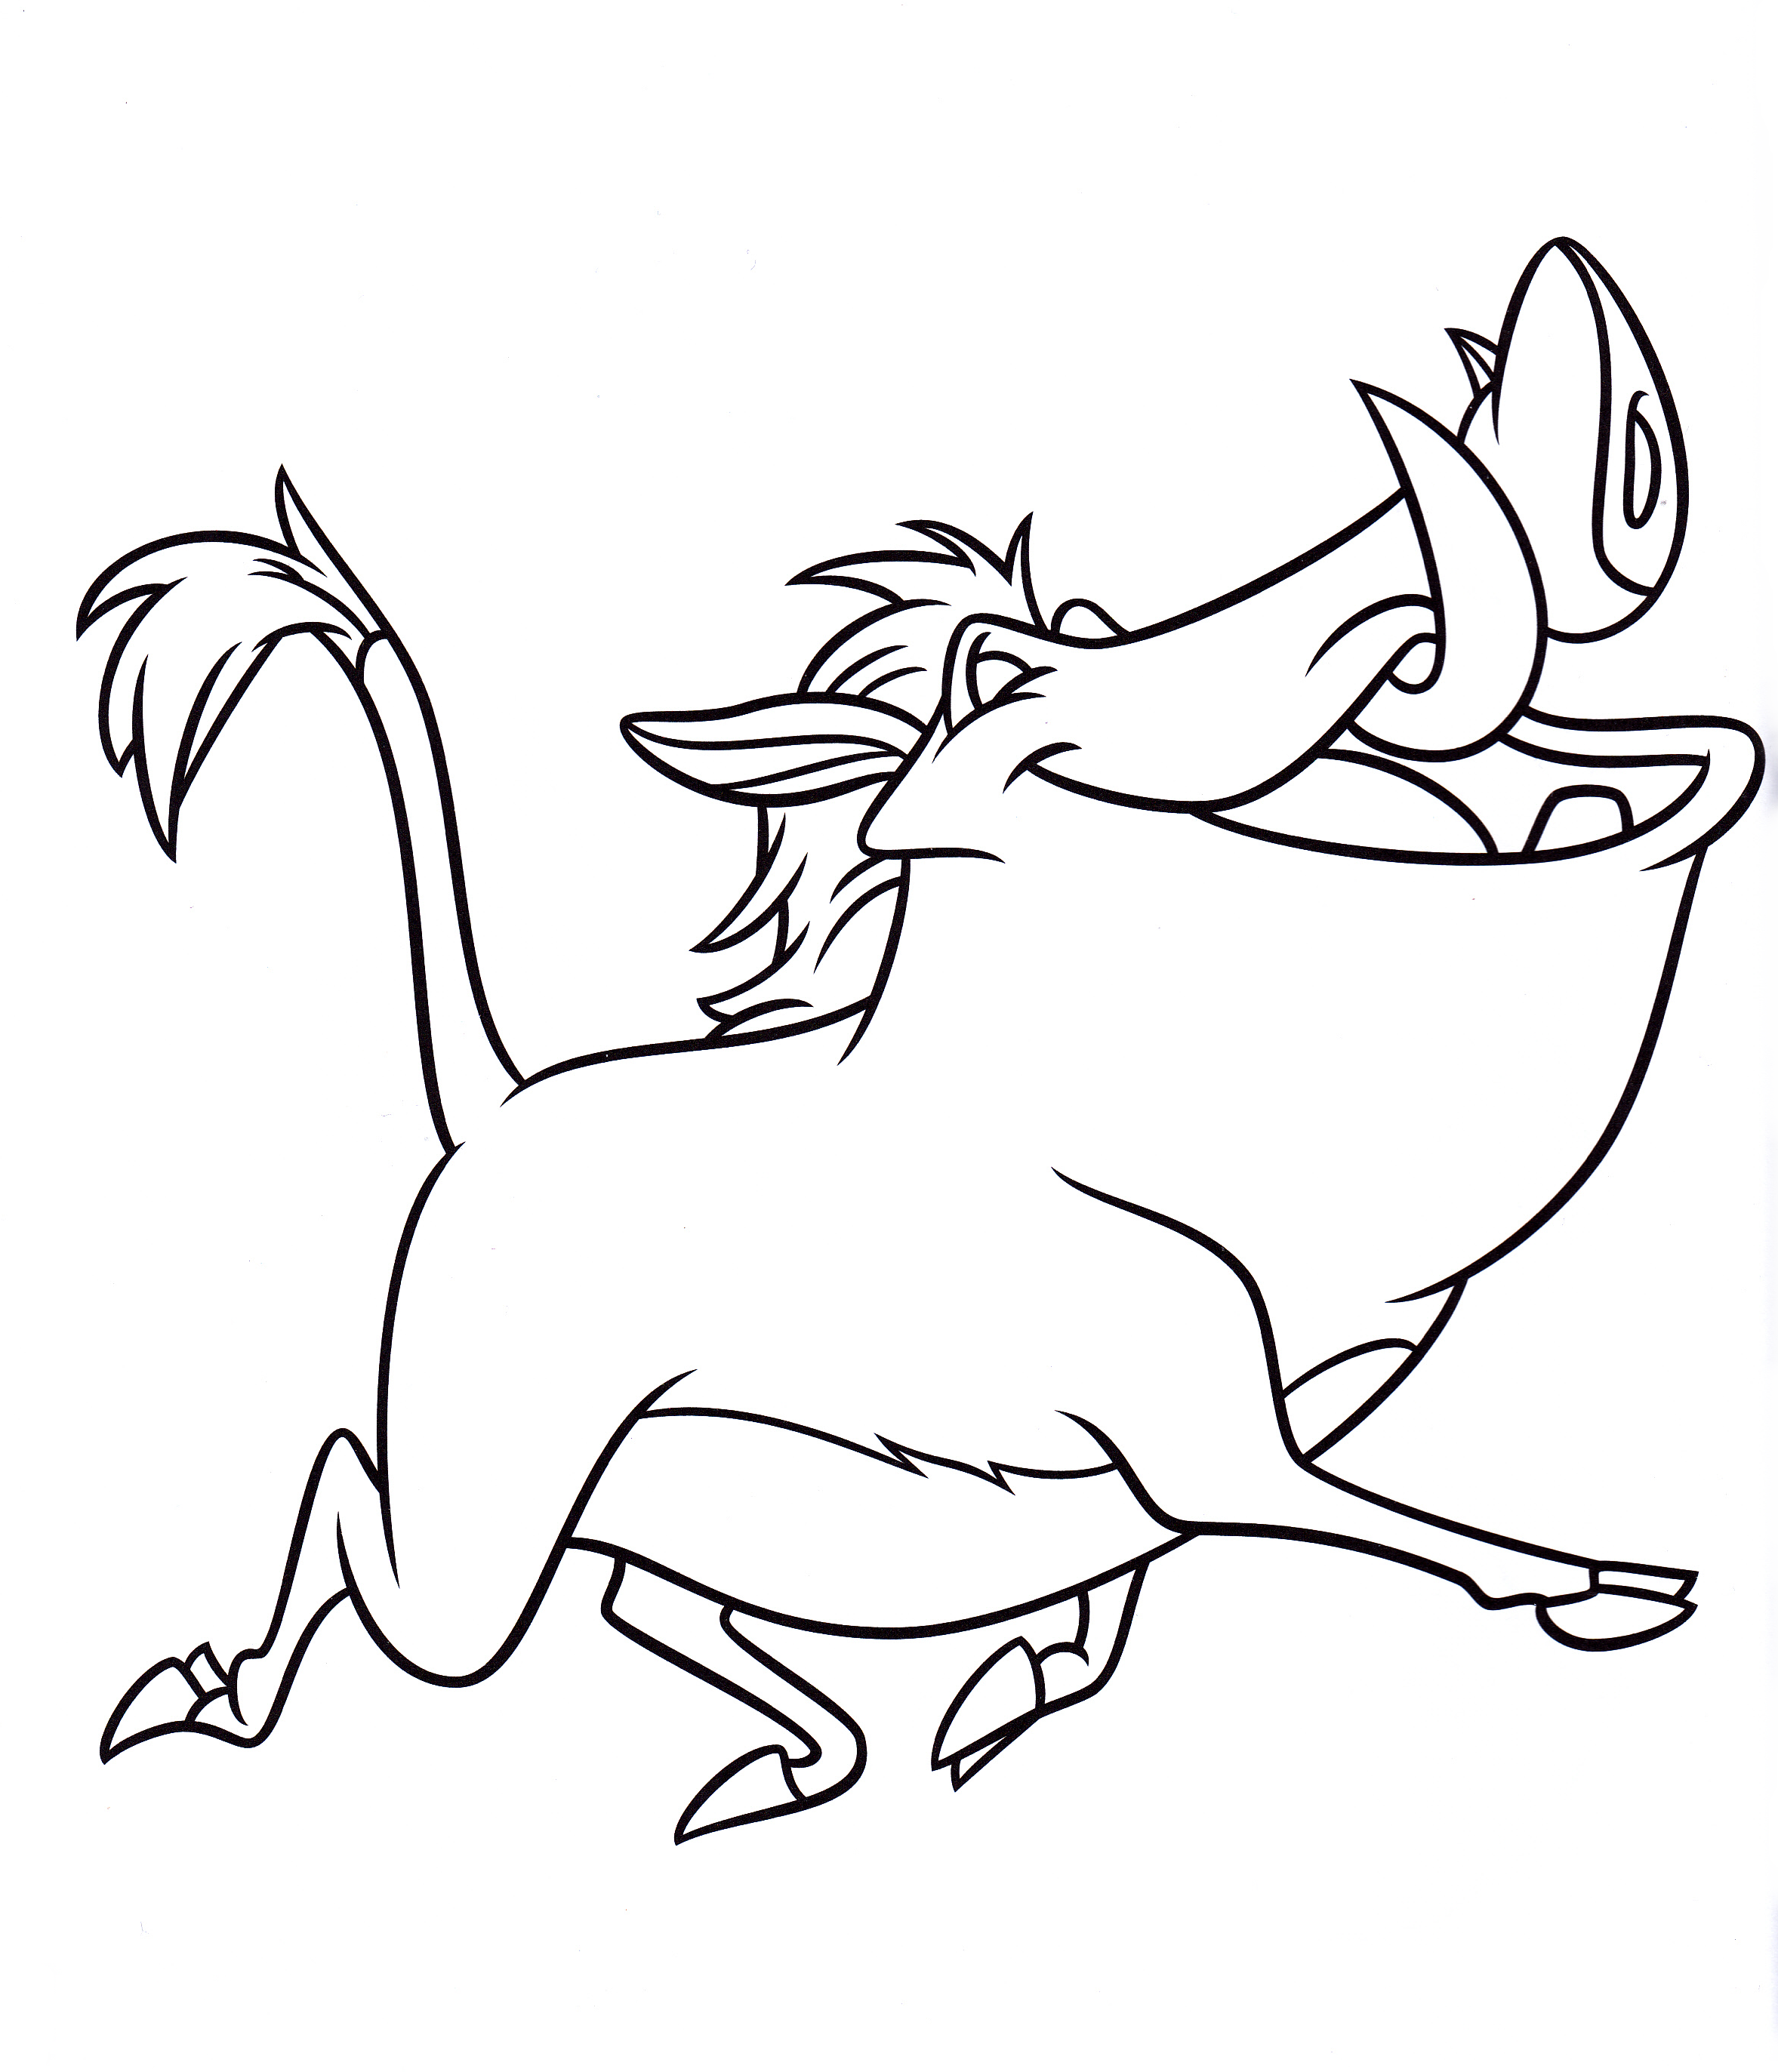 pumbaa from disney universe coloring page Pumbaa from disney universe coloring page